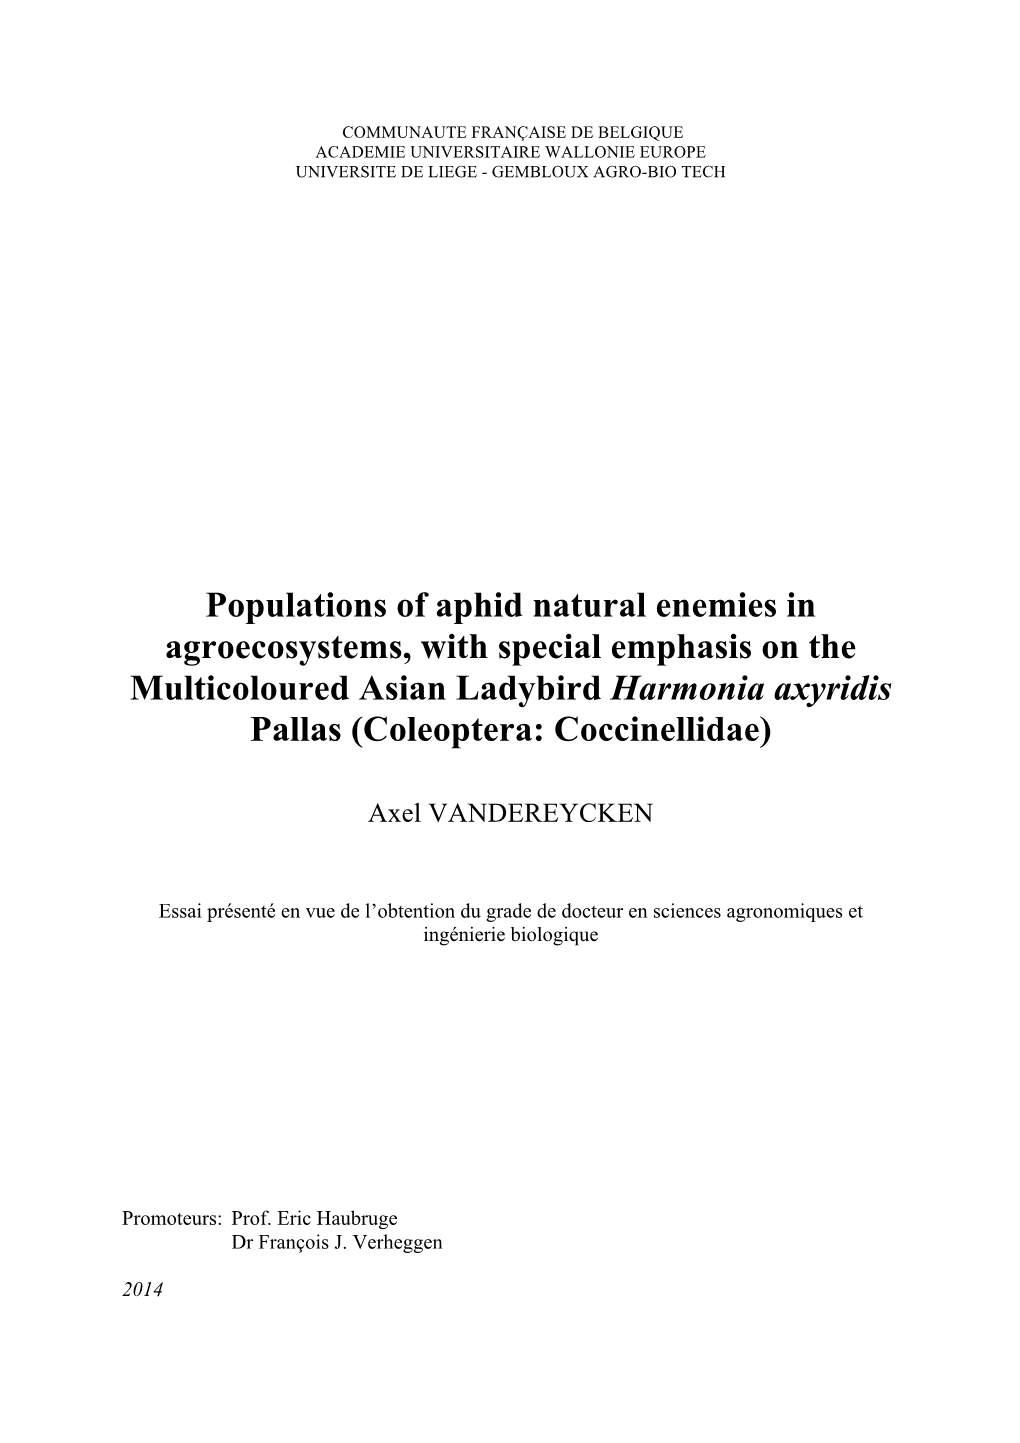 Populations of Aphid Natural Enemies in Agroecosystems, with Special